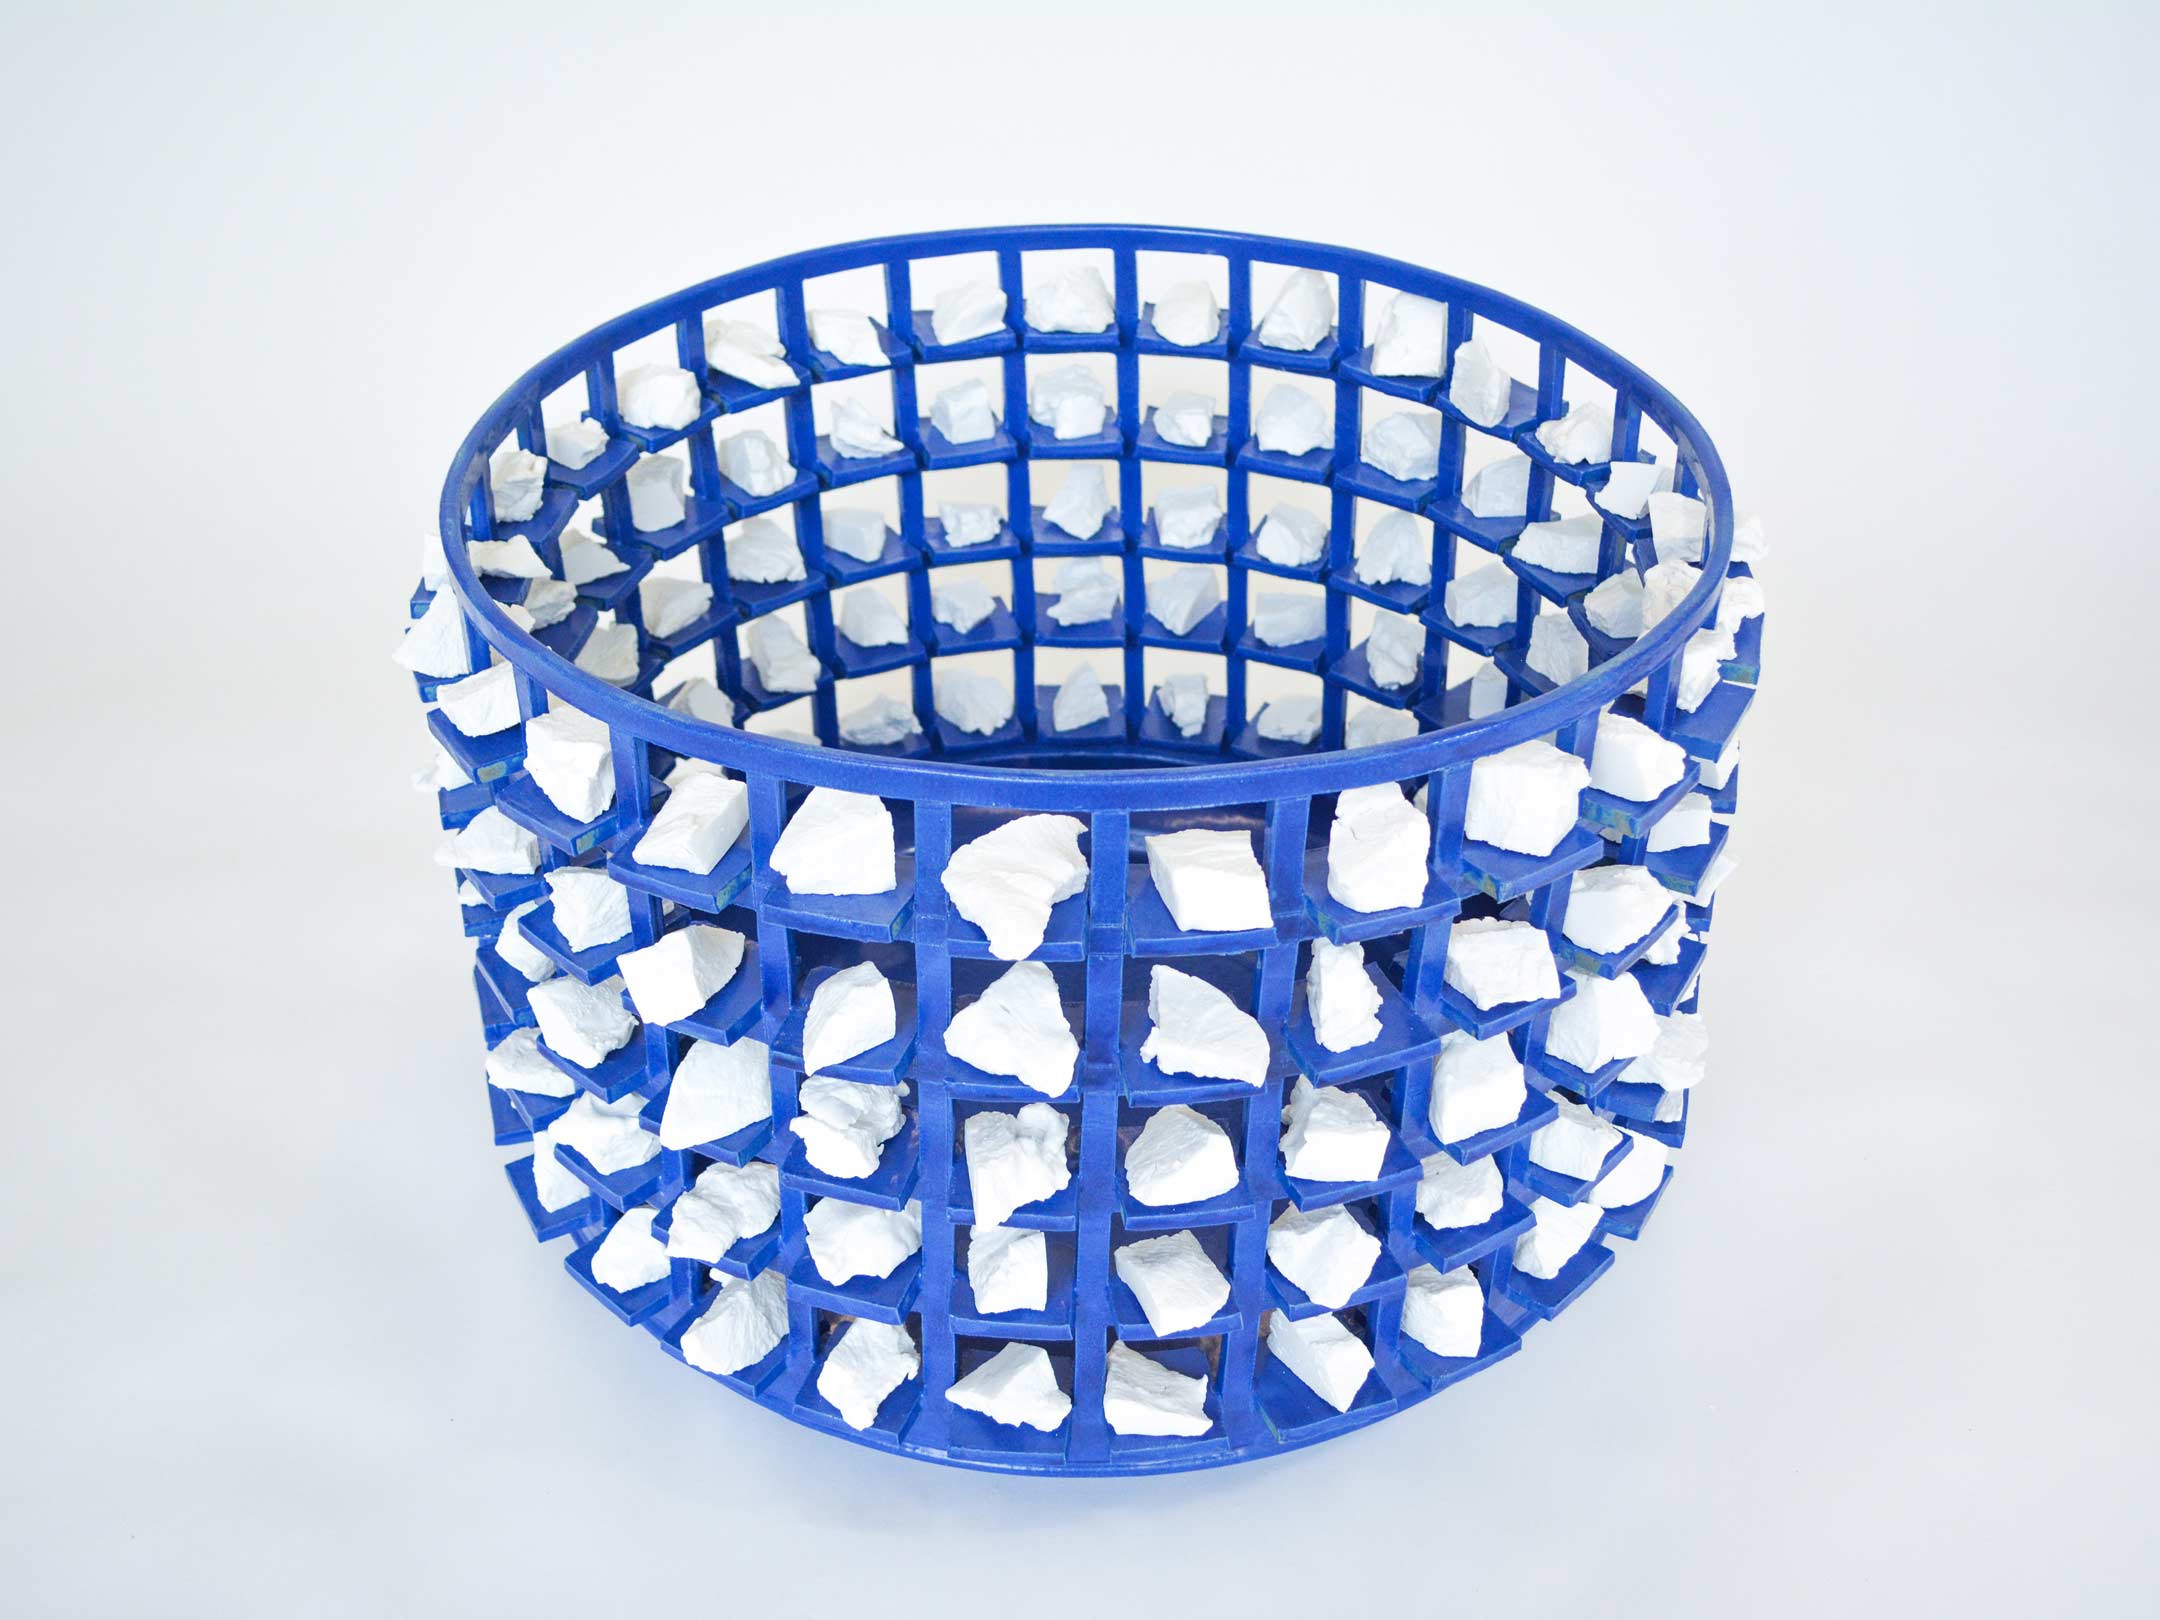 Large, wide blue stoneware vessel. Exterior is made up of a grid structure. Irregular white stones are inserted into the spaces formed by the grid.